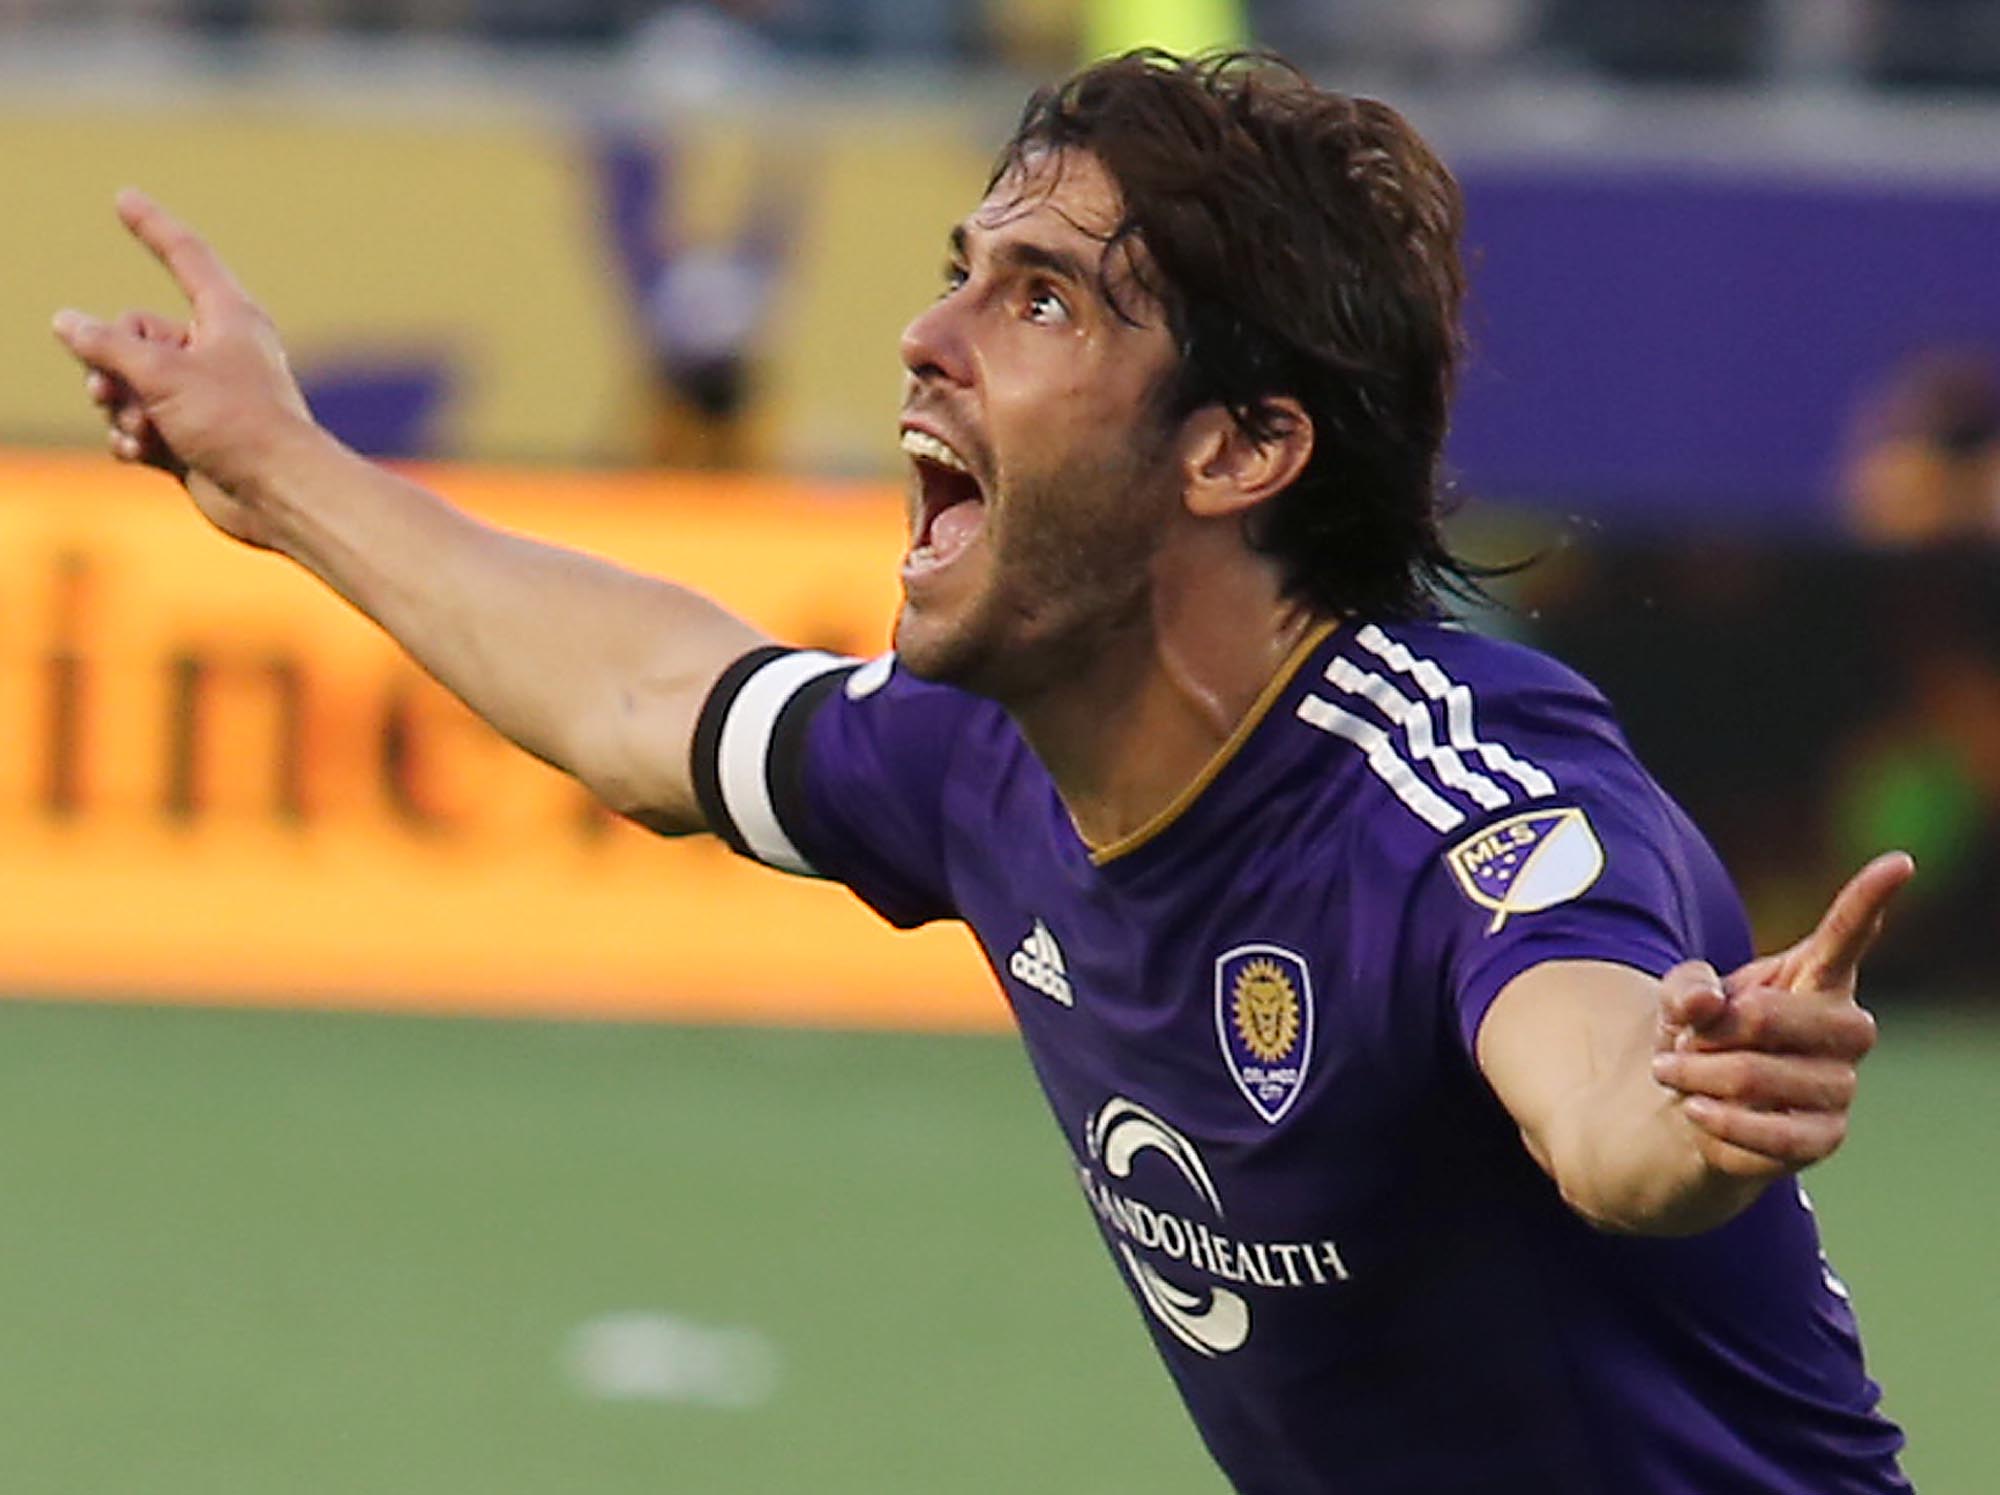 Orlando player Kaka celebrates after scoring a game-tying goal during the New York City Soccer Club at Orlando City Soccer Club MLS match at the Orlando Citrus Bowl on Sunday, March 8, 2015. The game ended in a 1-1 tie. (Stephen M. Dowell/Orlando Sentinel)